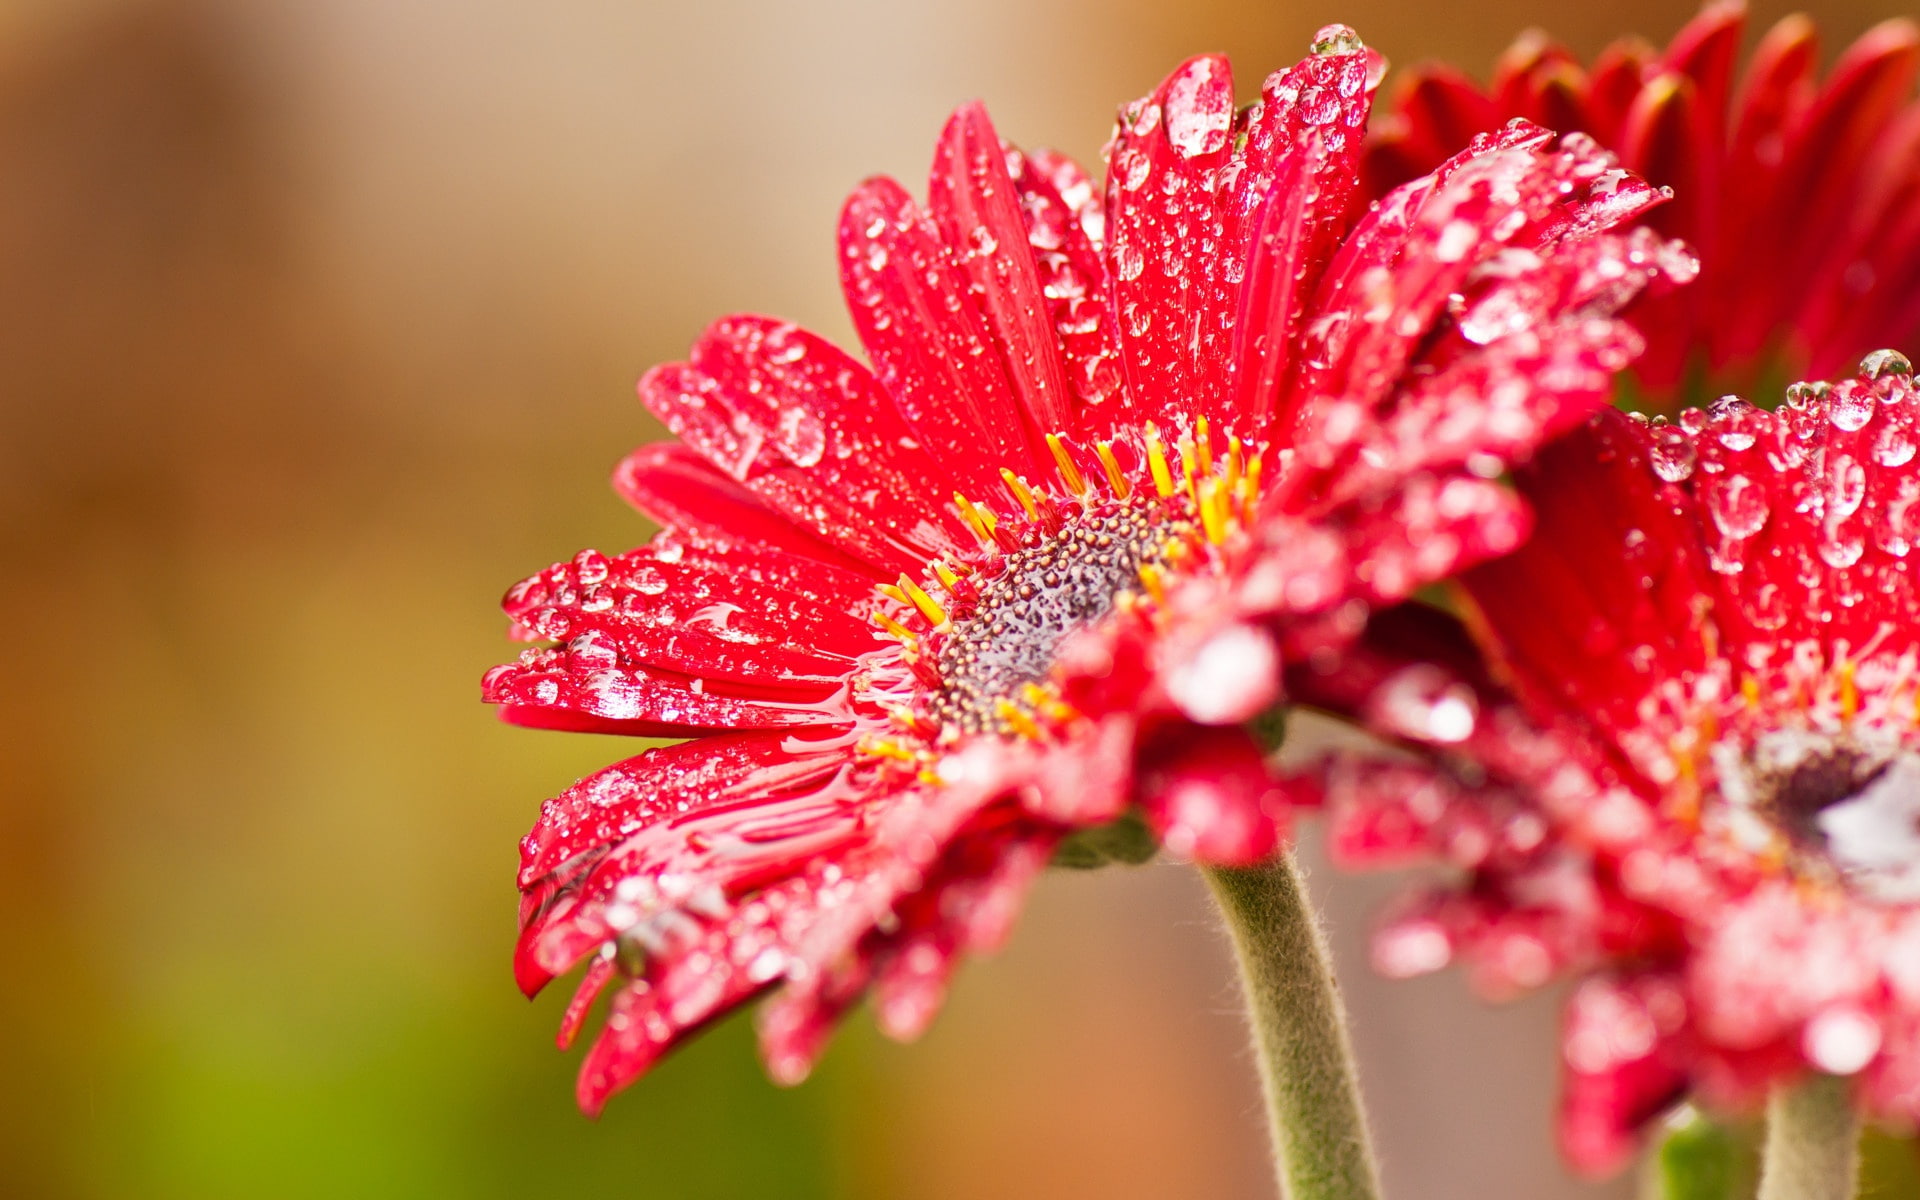 Red gerbera flowers after rain, red daisies